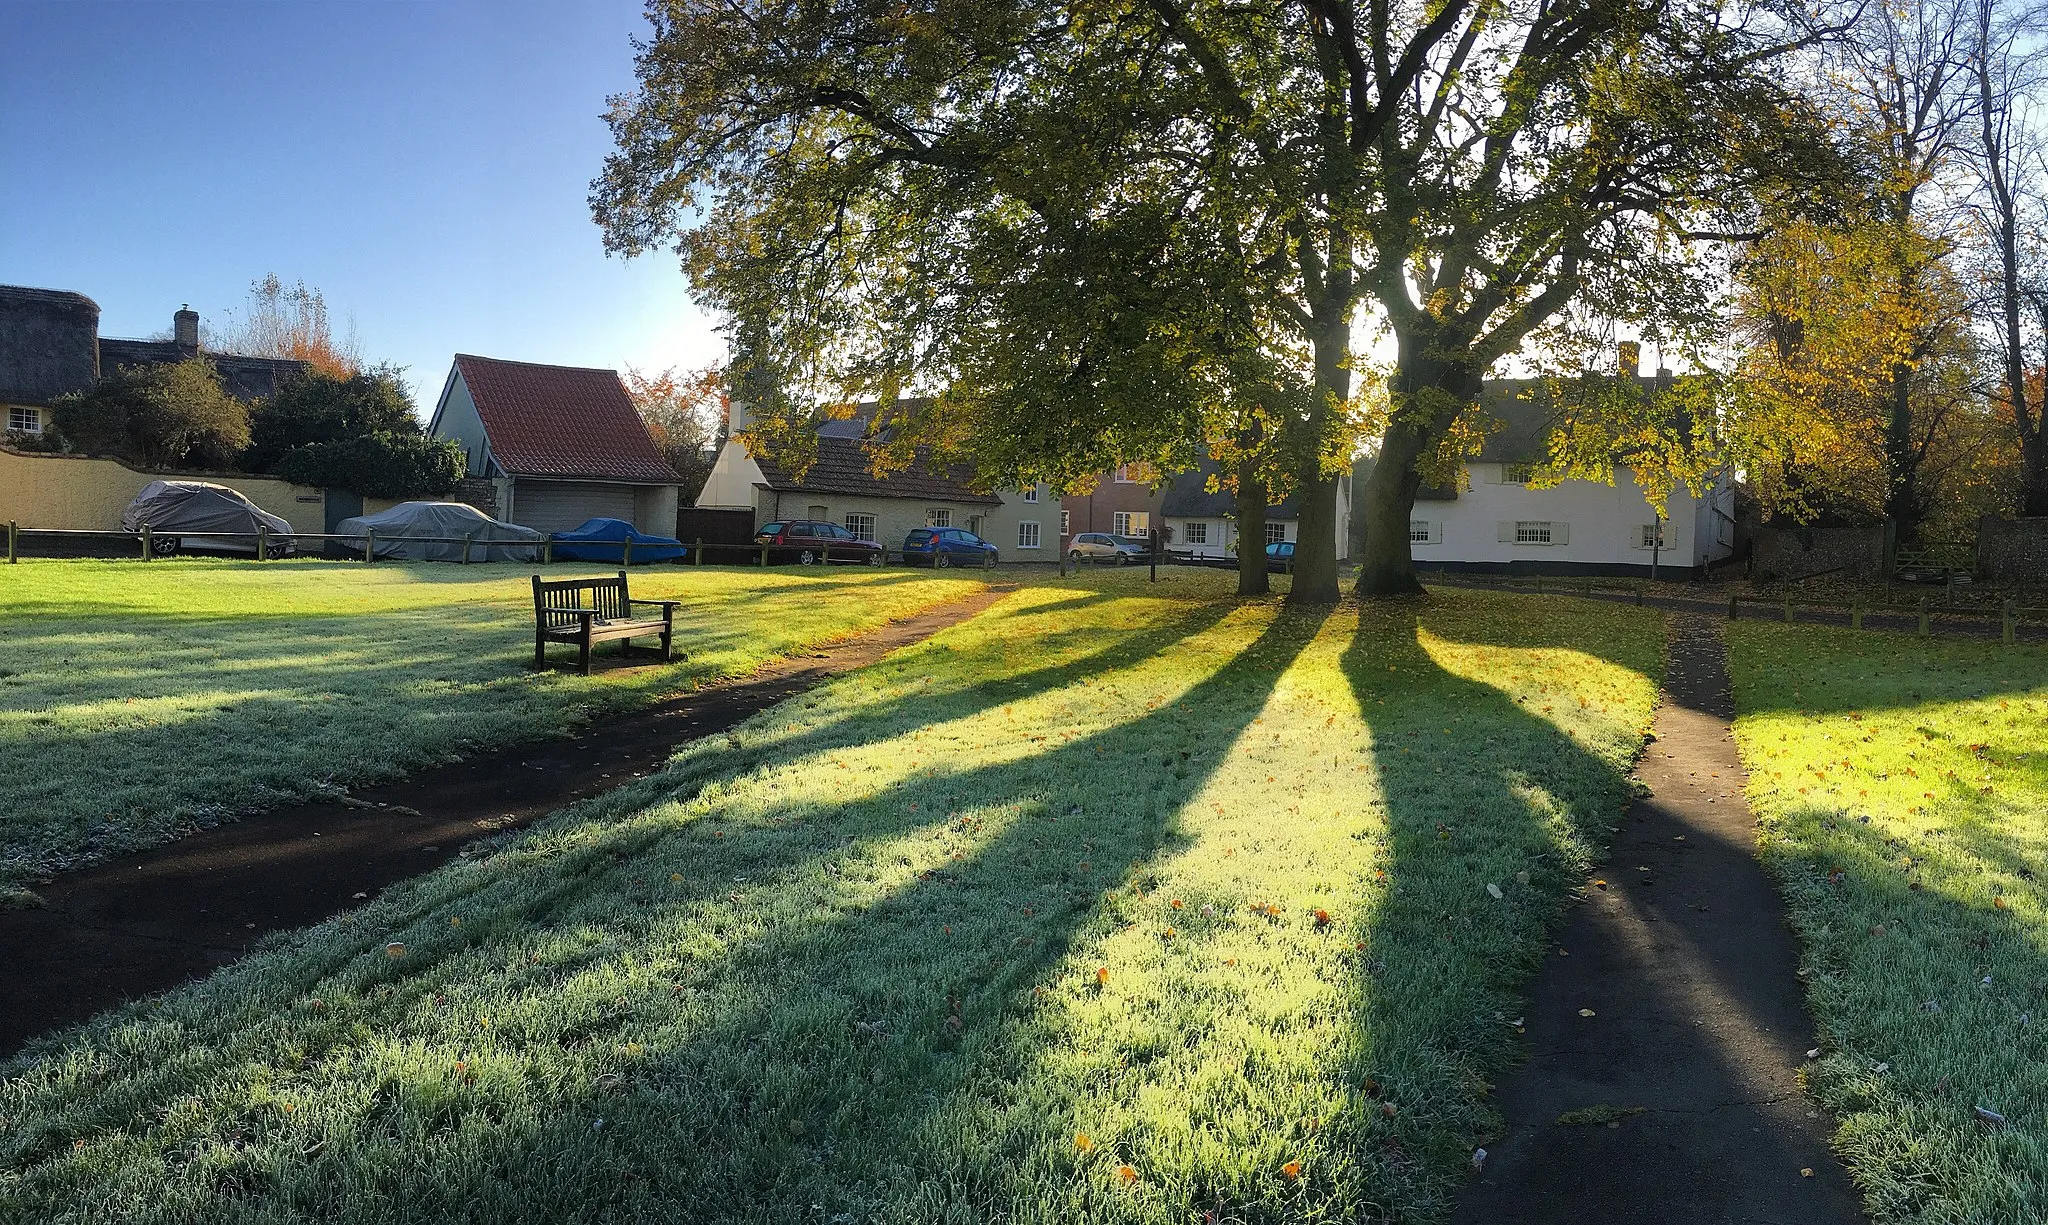 Photo showing: The village green in Duxford, Cambridgeshire